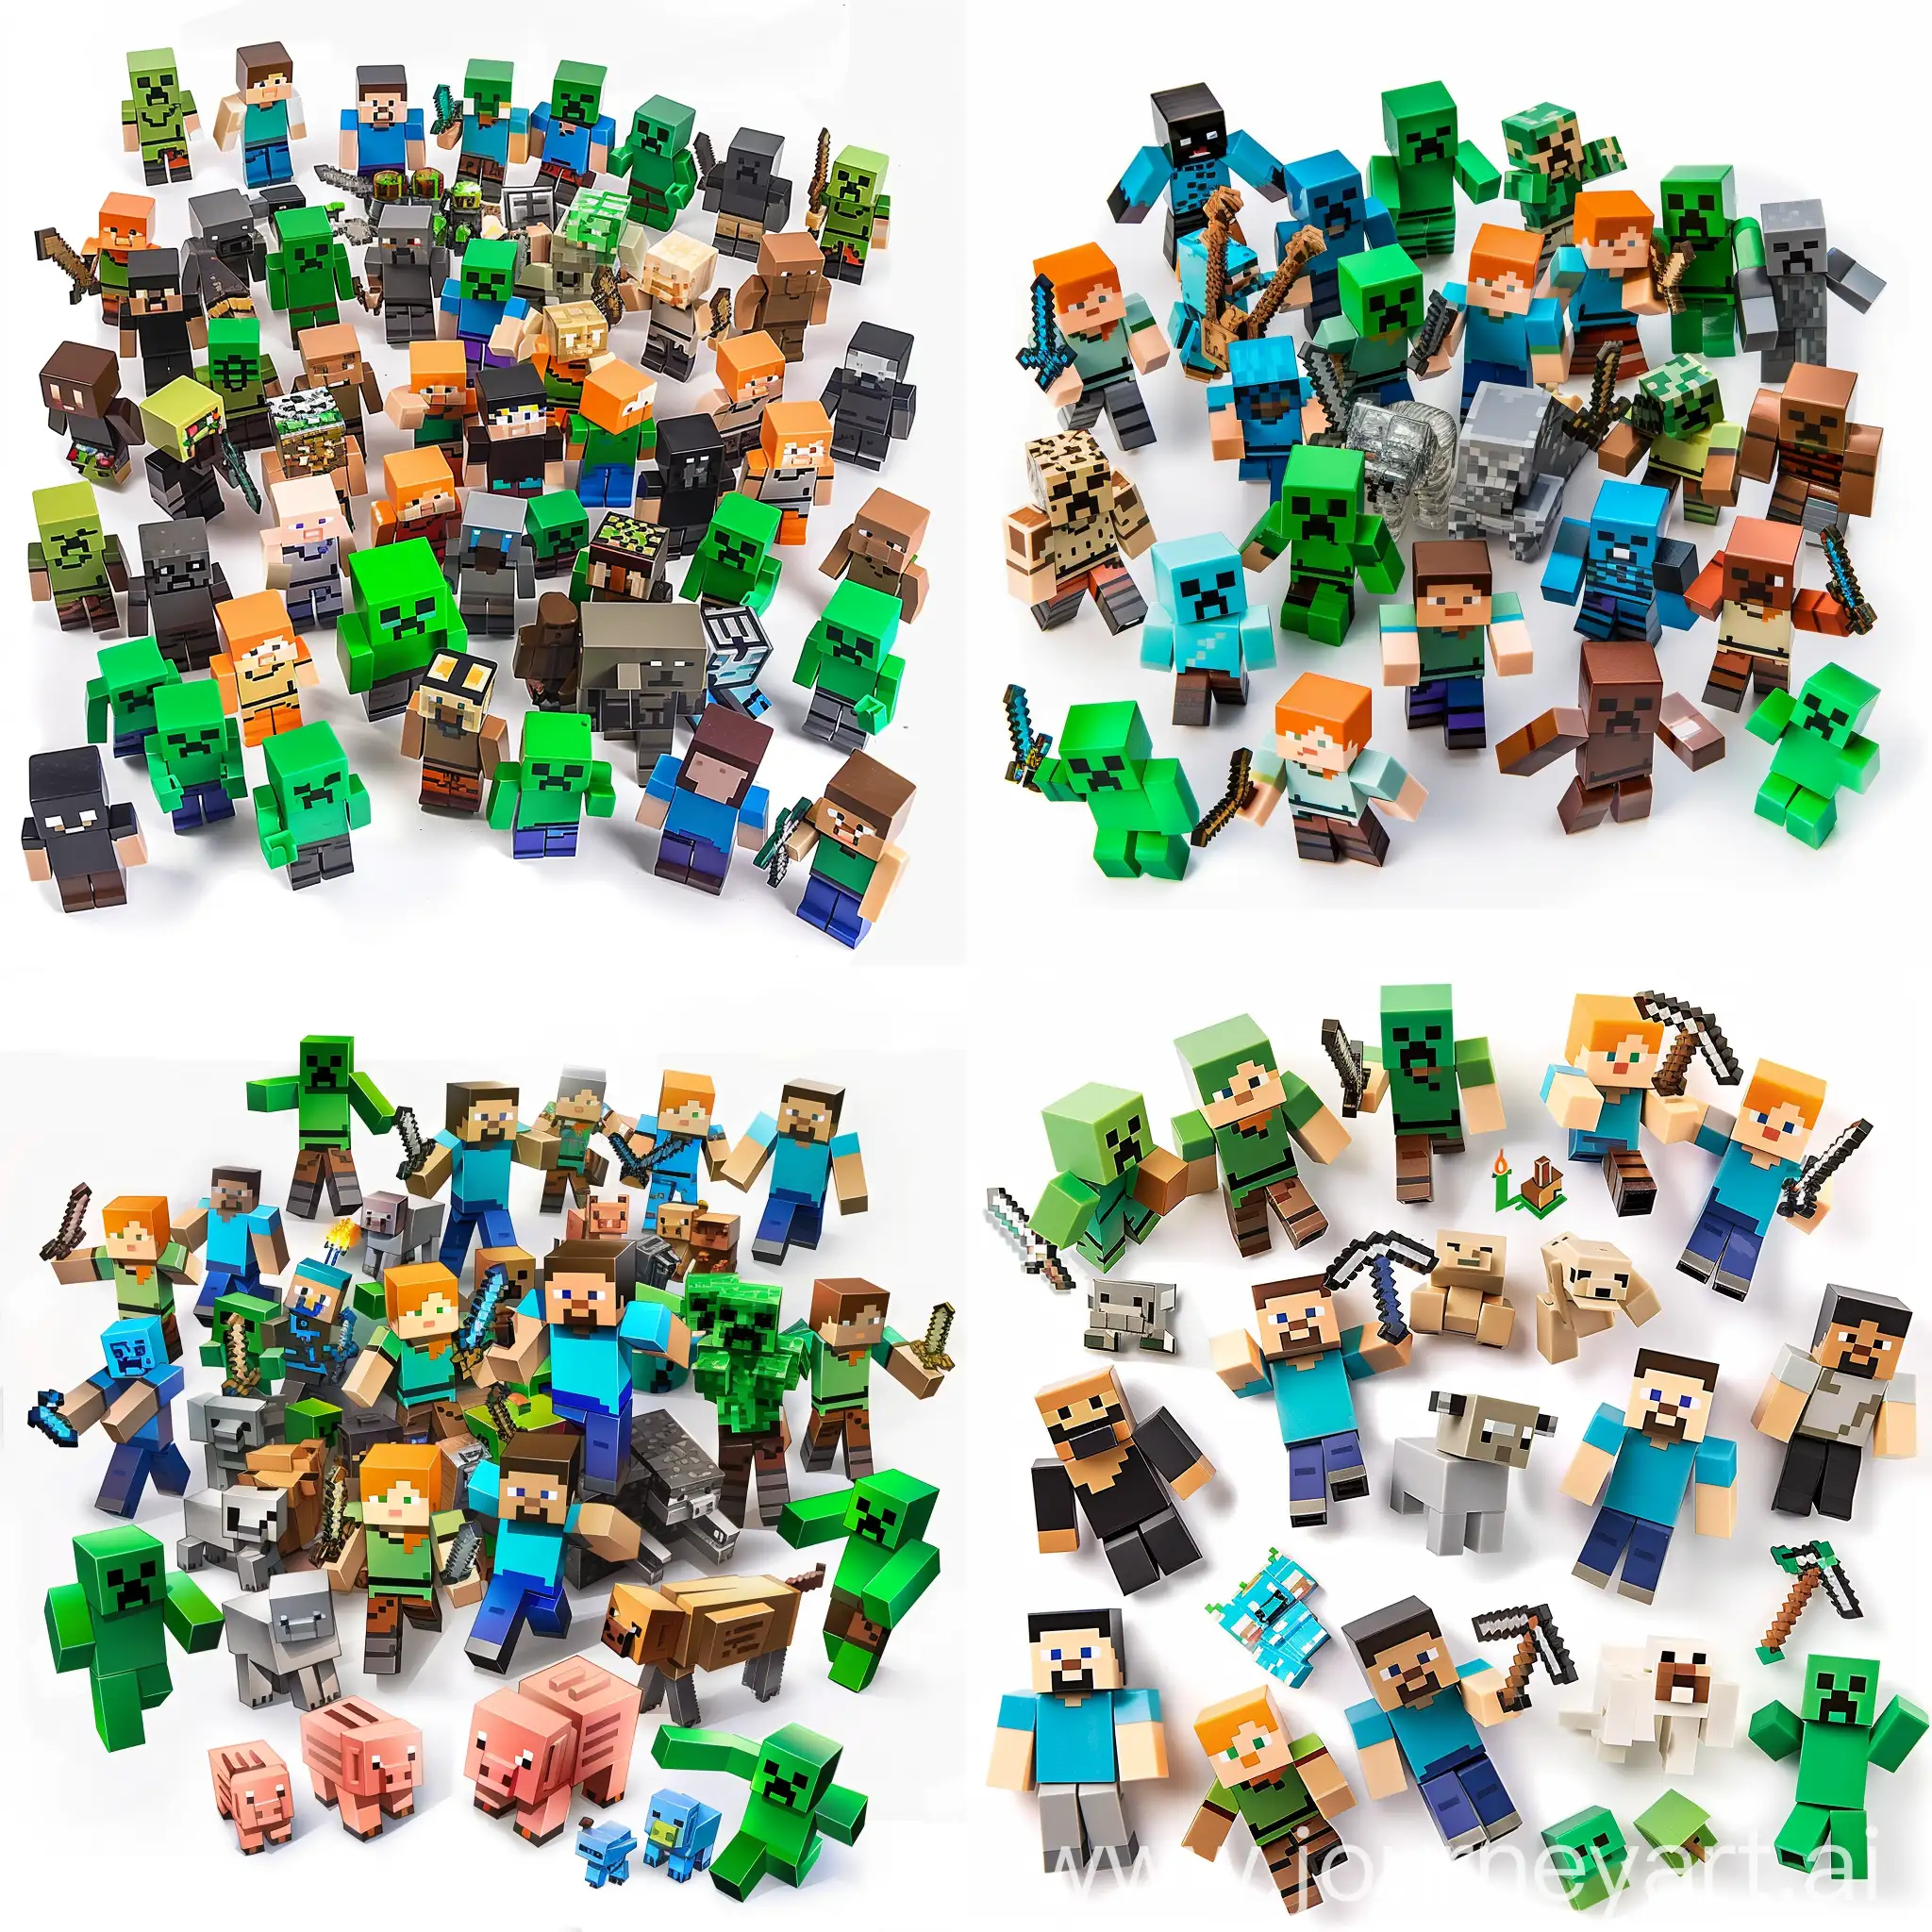 Minecraft-Steve-Characters-in-Dynamic-Poses-on-White-Background